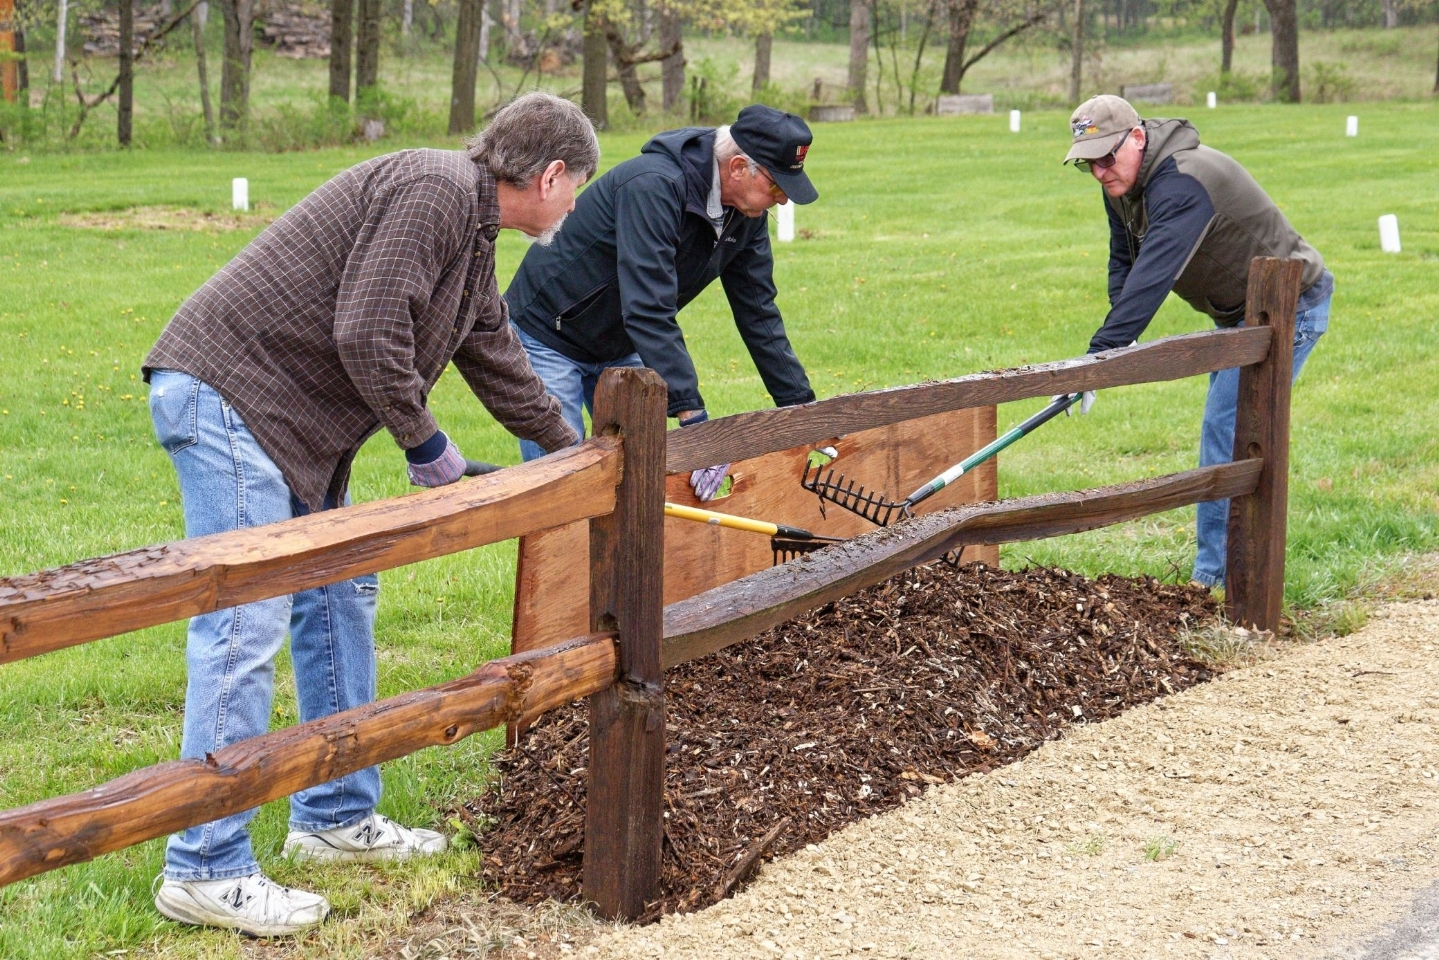 Raking Out the Mulch - Getting Started.
Rock River Heritage Park (formerly Camp Indian Trails).